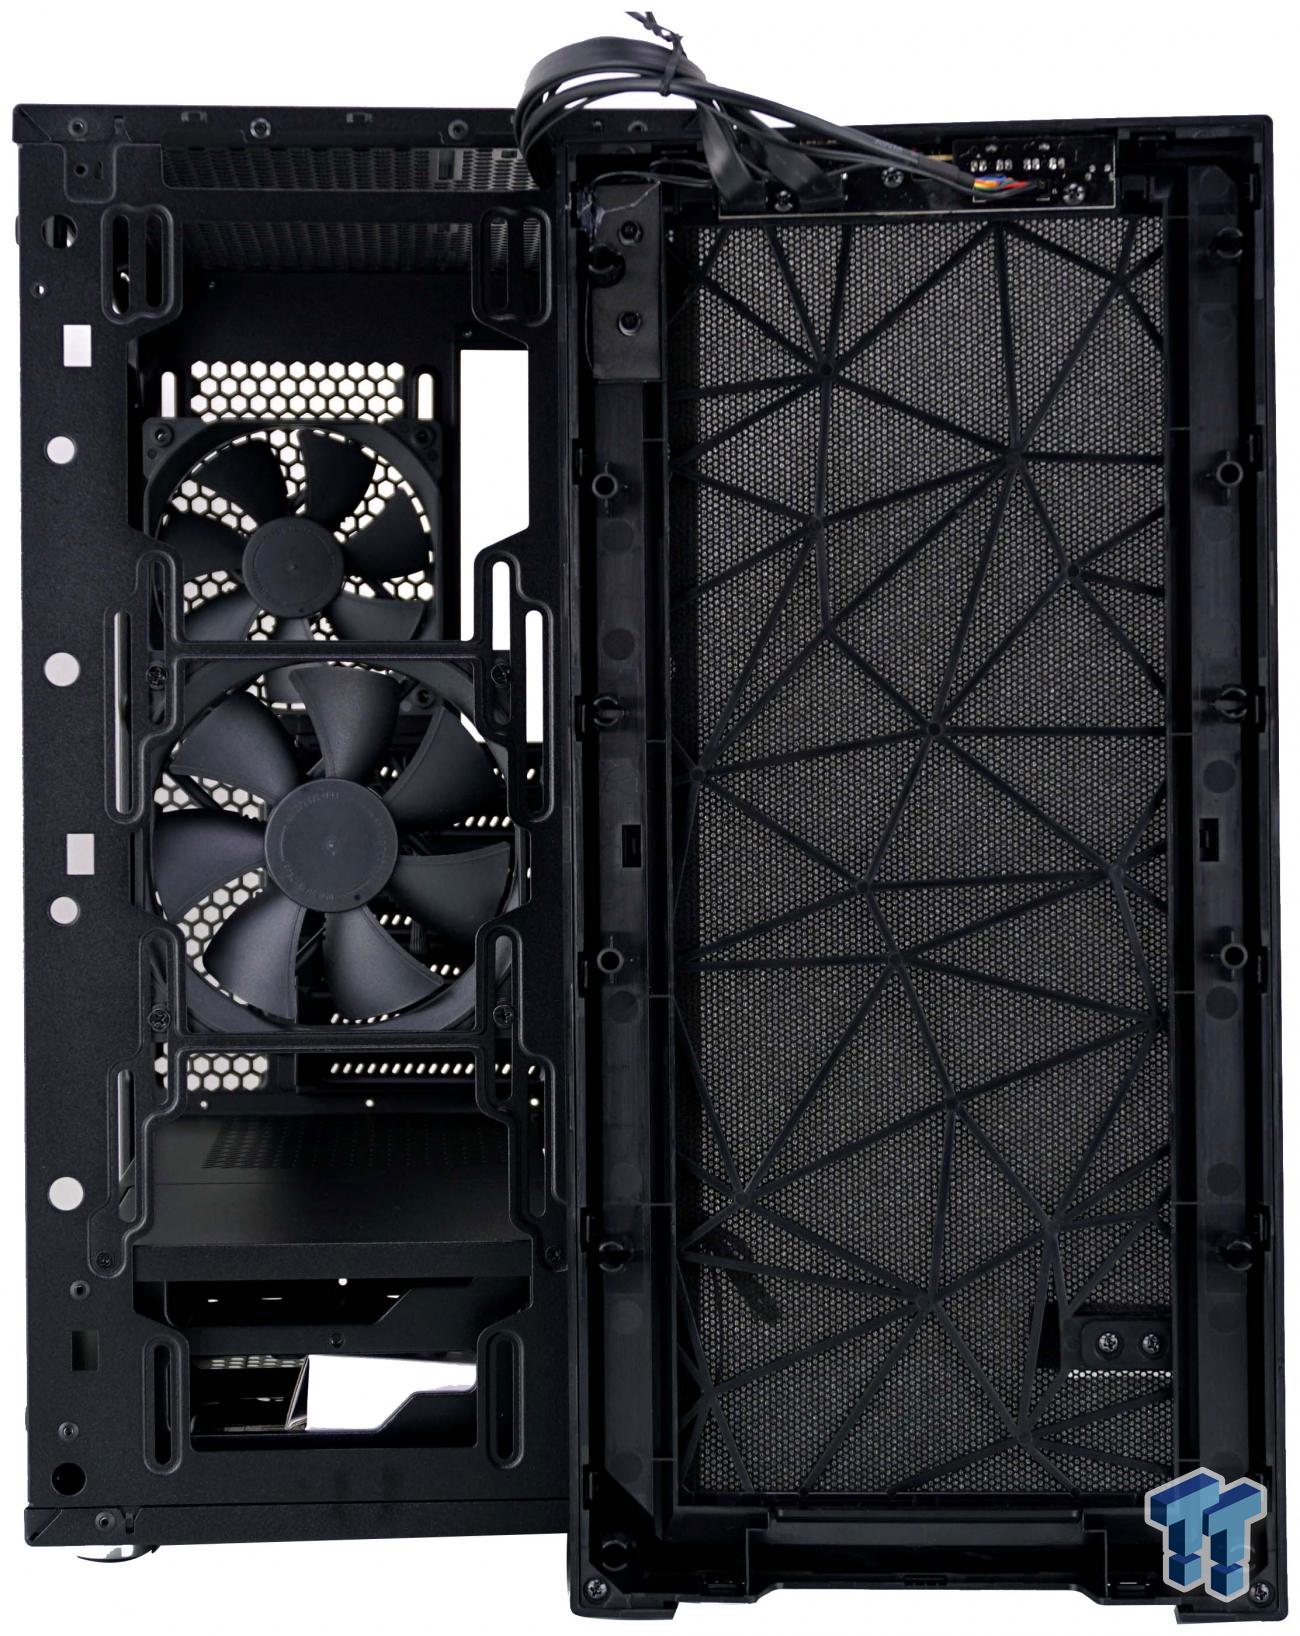 Fractal Design Meshify C Mid Tower Chassis Review Tweaktown,Roller Coaster Design Game